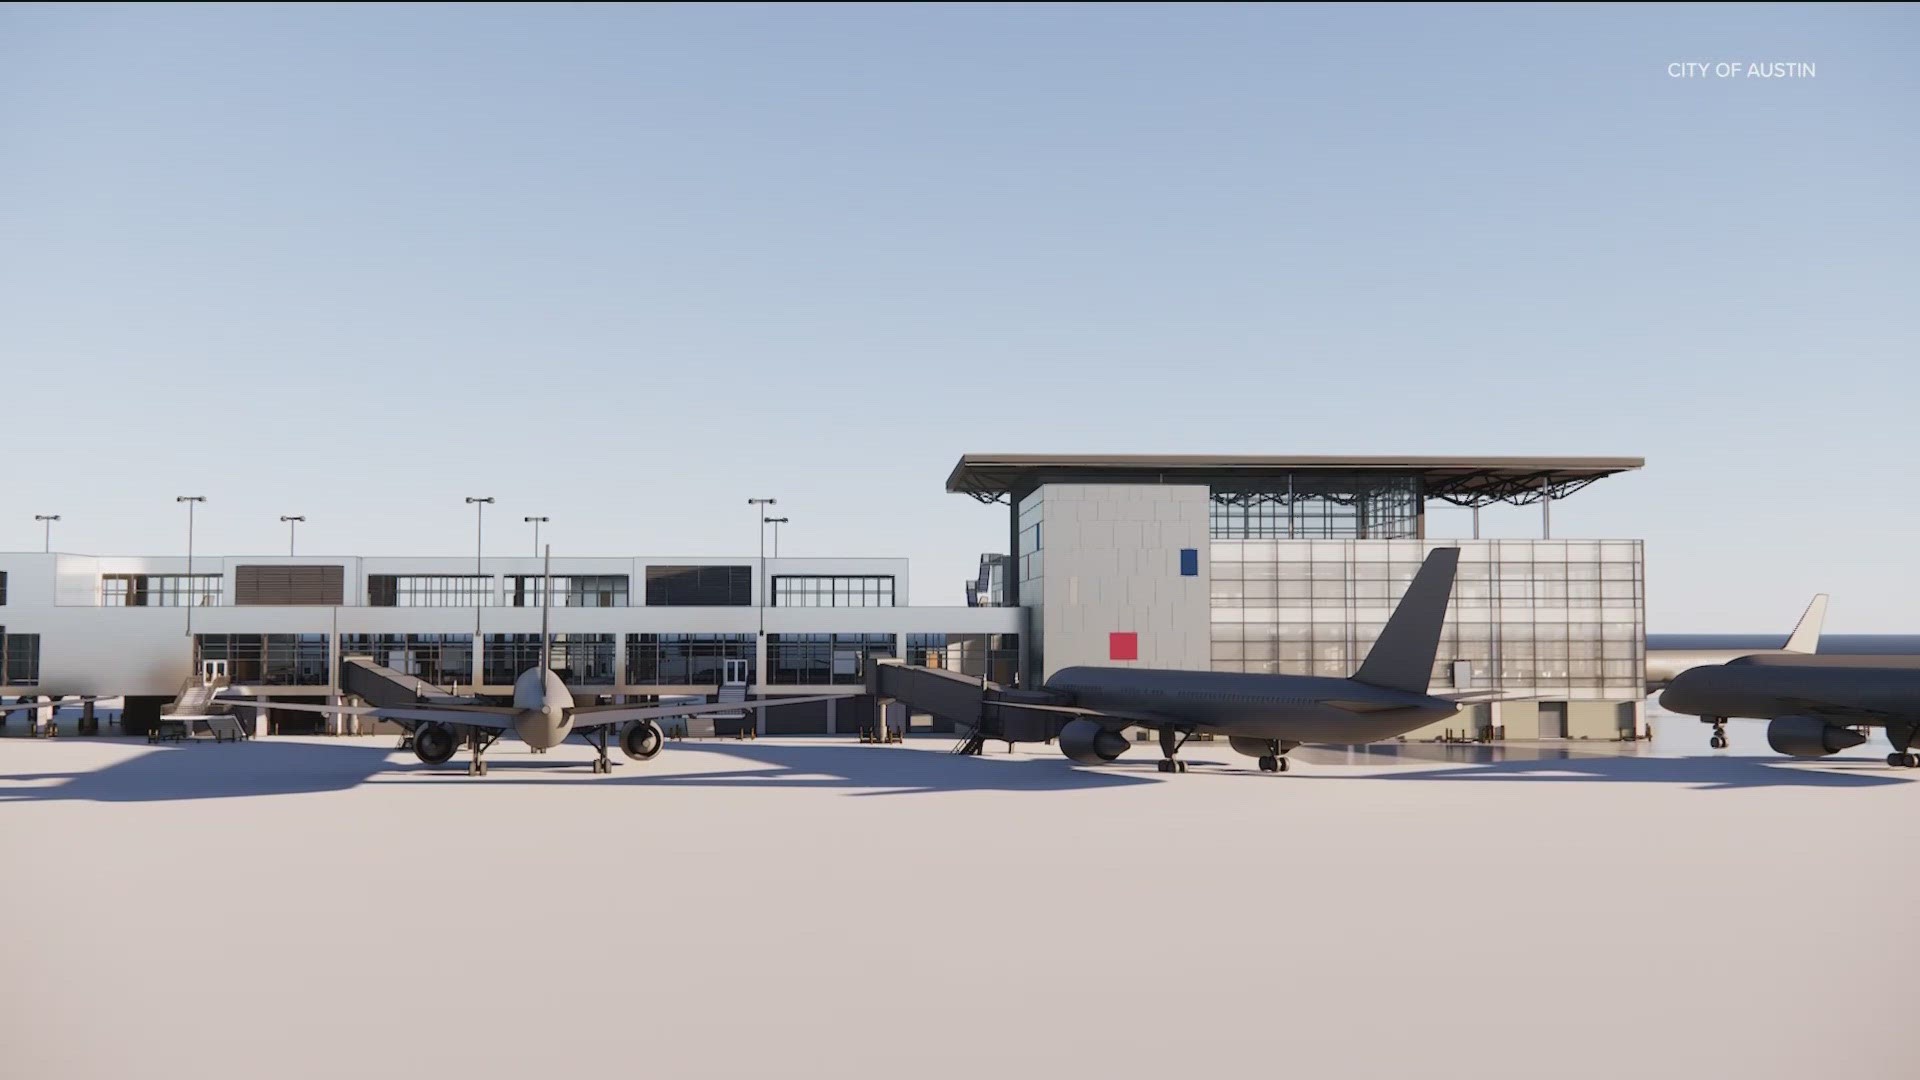 Staff at Austin's airport say they're getting ready to see another record-breaking summer travel season. Here are the projects that are in the works.